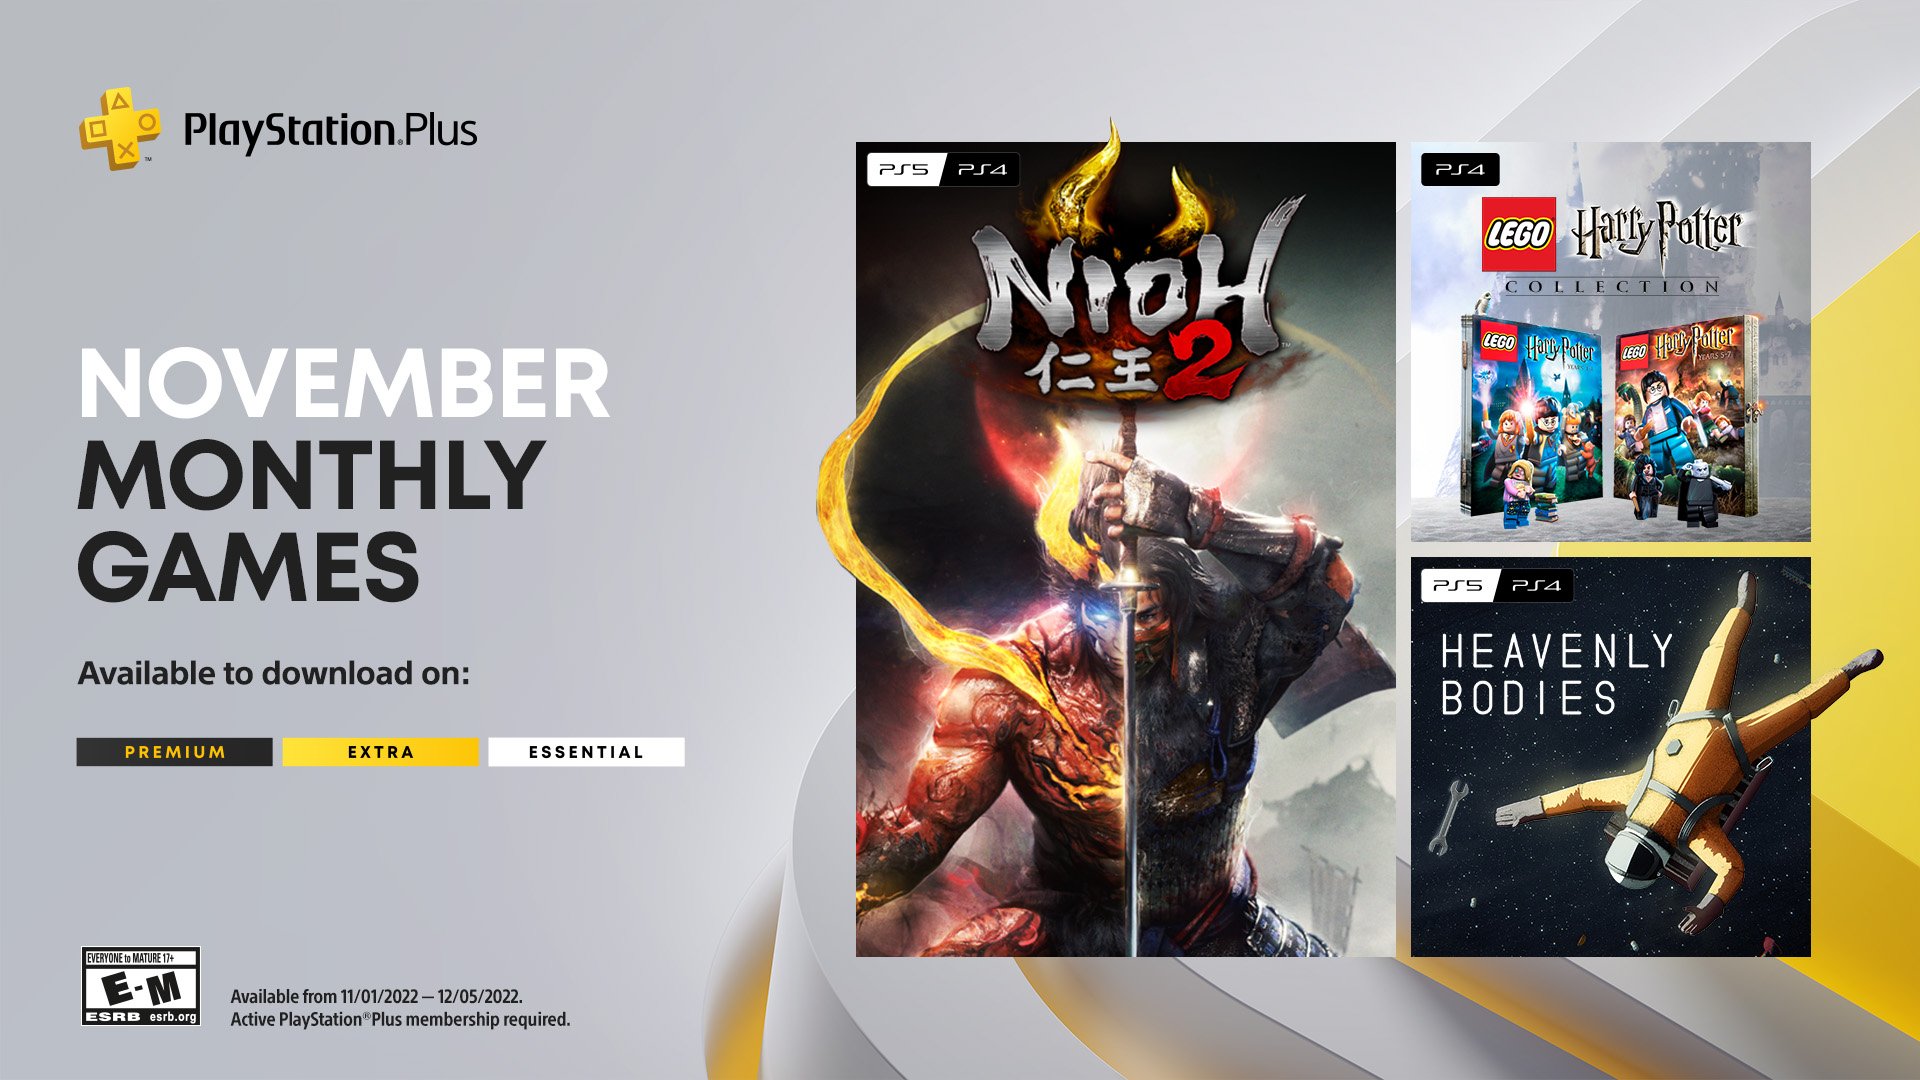 PlayStation Asia on X: Here are your PlayStation Plus Monthly Games for  June: 🪓 God of War 🥷 Naruto to Boruto: Shinobi Striker 🧽 Nickelodeon  All-Star Brawl 🚙 Can't Drive This Available